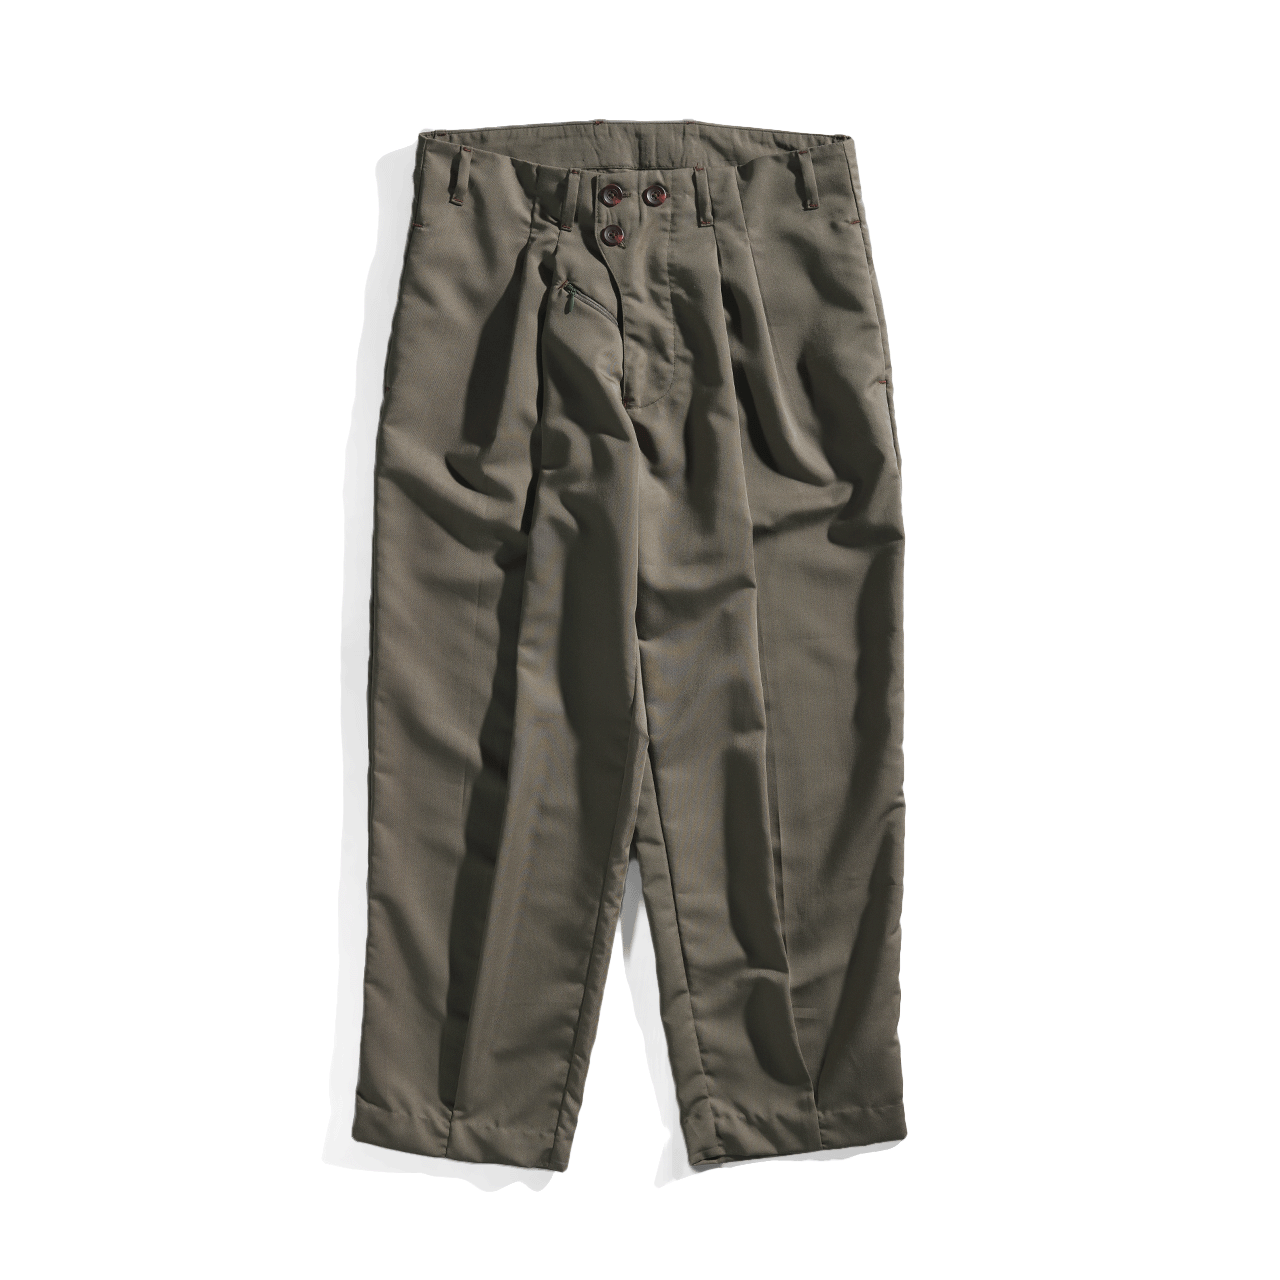 Nut Works Division Trousers - Fortune WWD